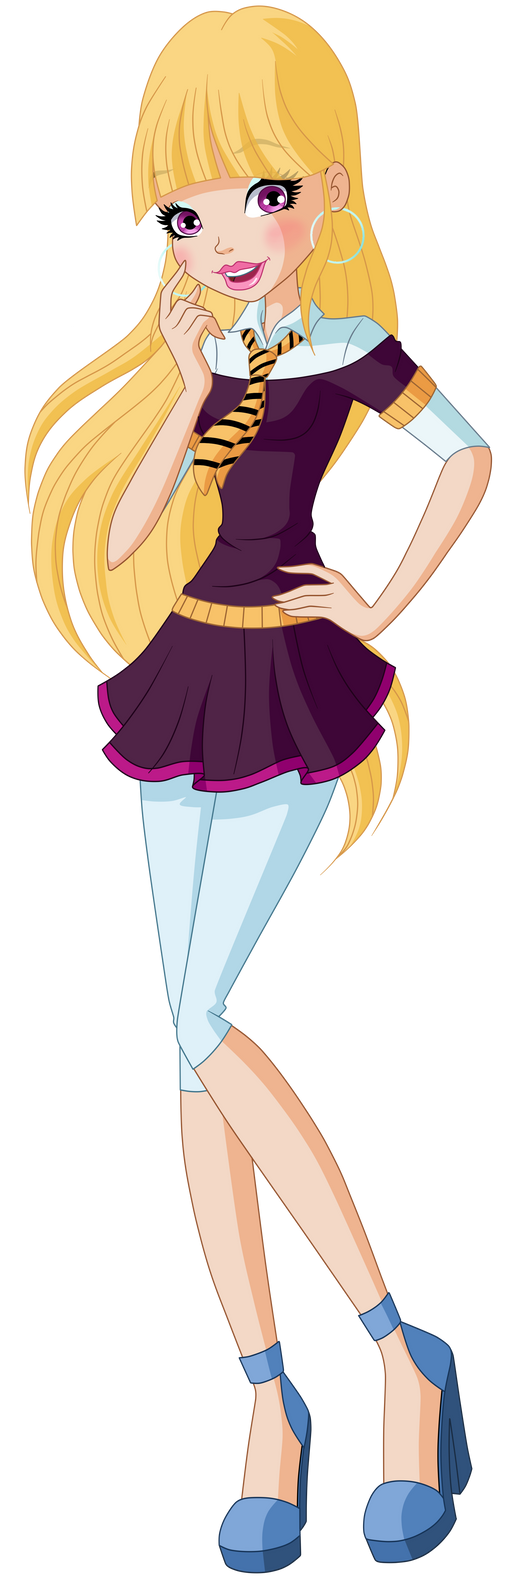 Melody in Regal Academy by Rosesweety on DeviantArt